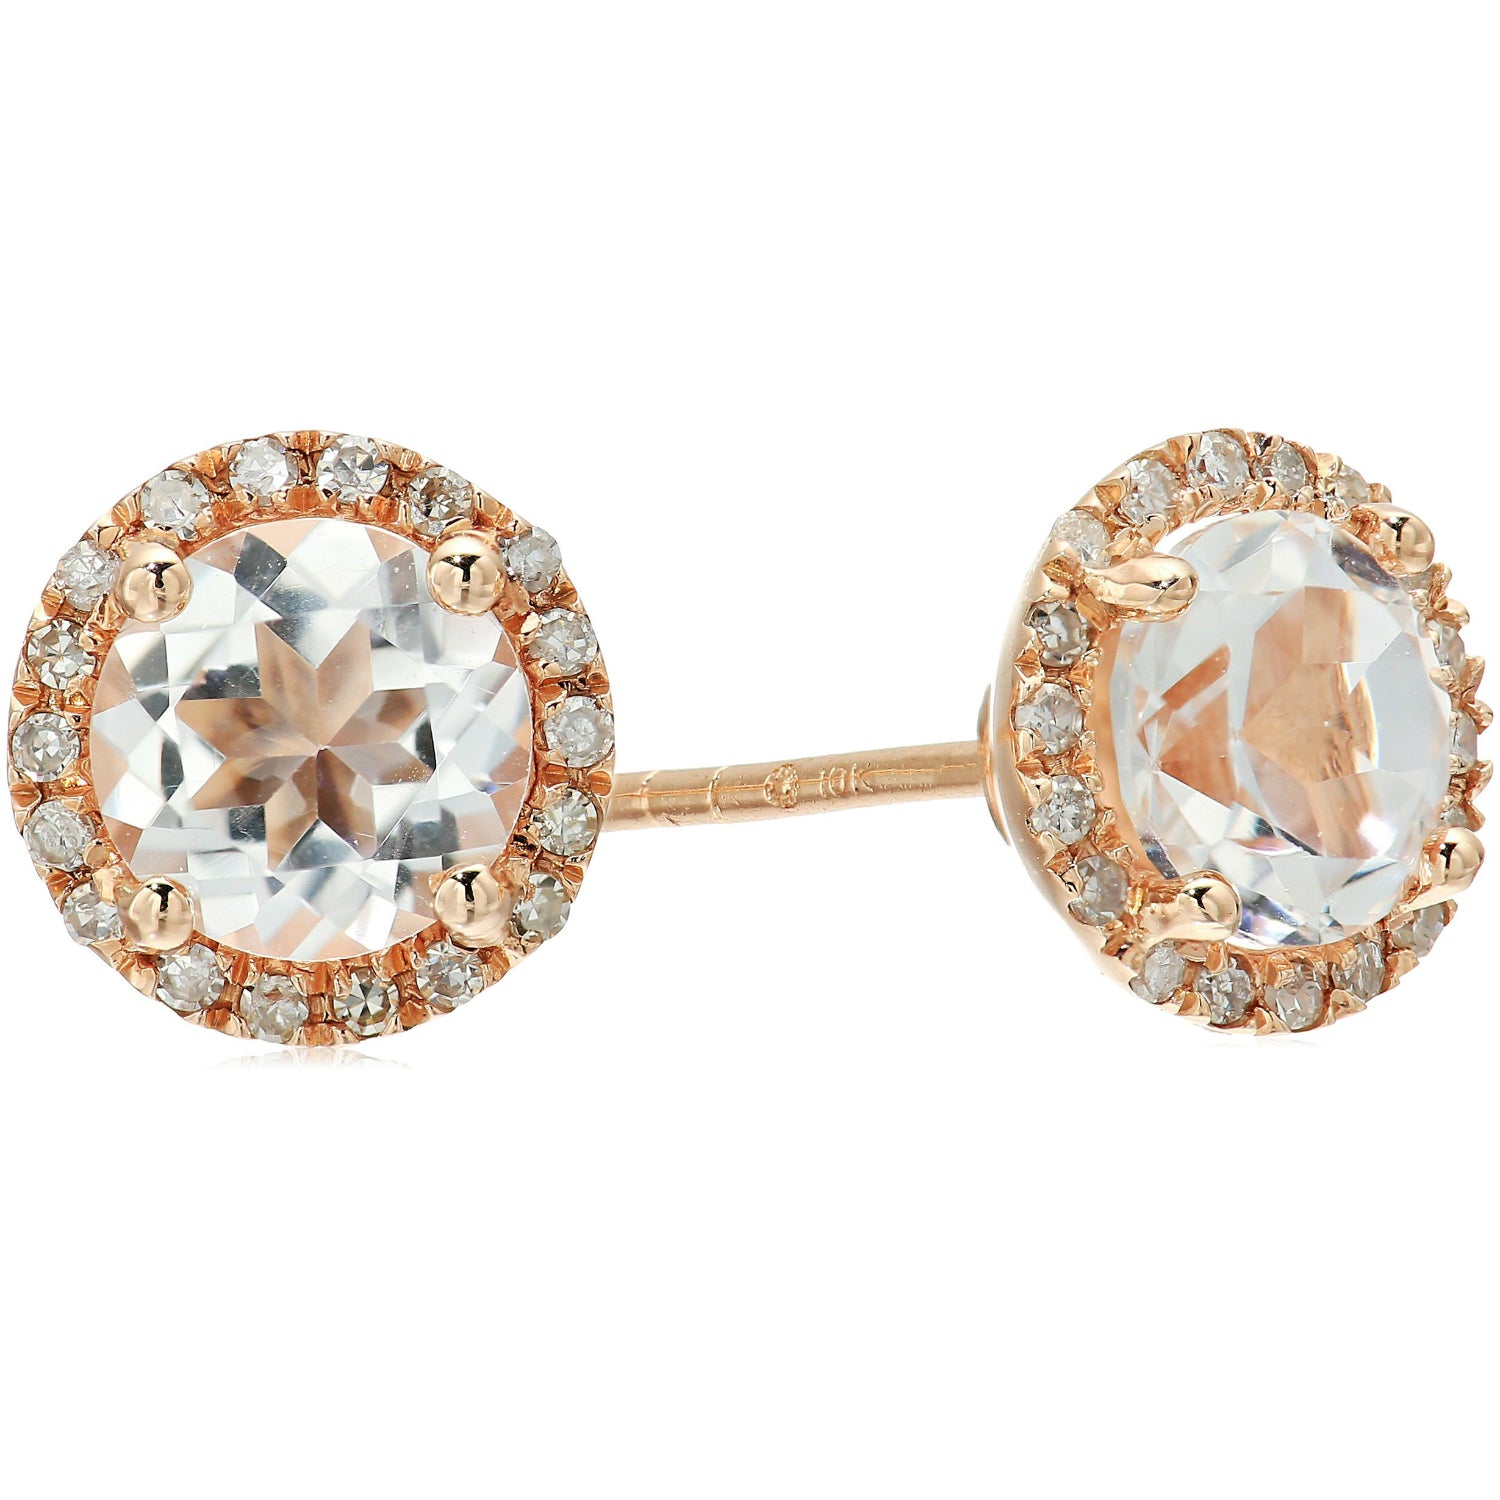 Pinctore 10k Rose Gold White Topaz and Diamond Classic Princess Di Halo Stud Earrings (1/6 cttw, H-I Color, I1-I2 Clarity)